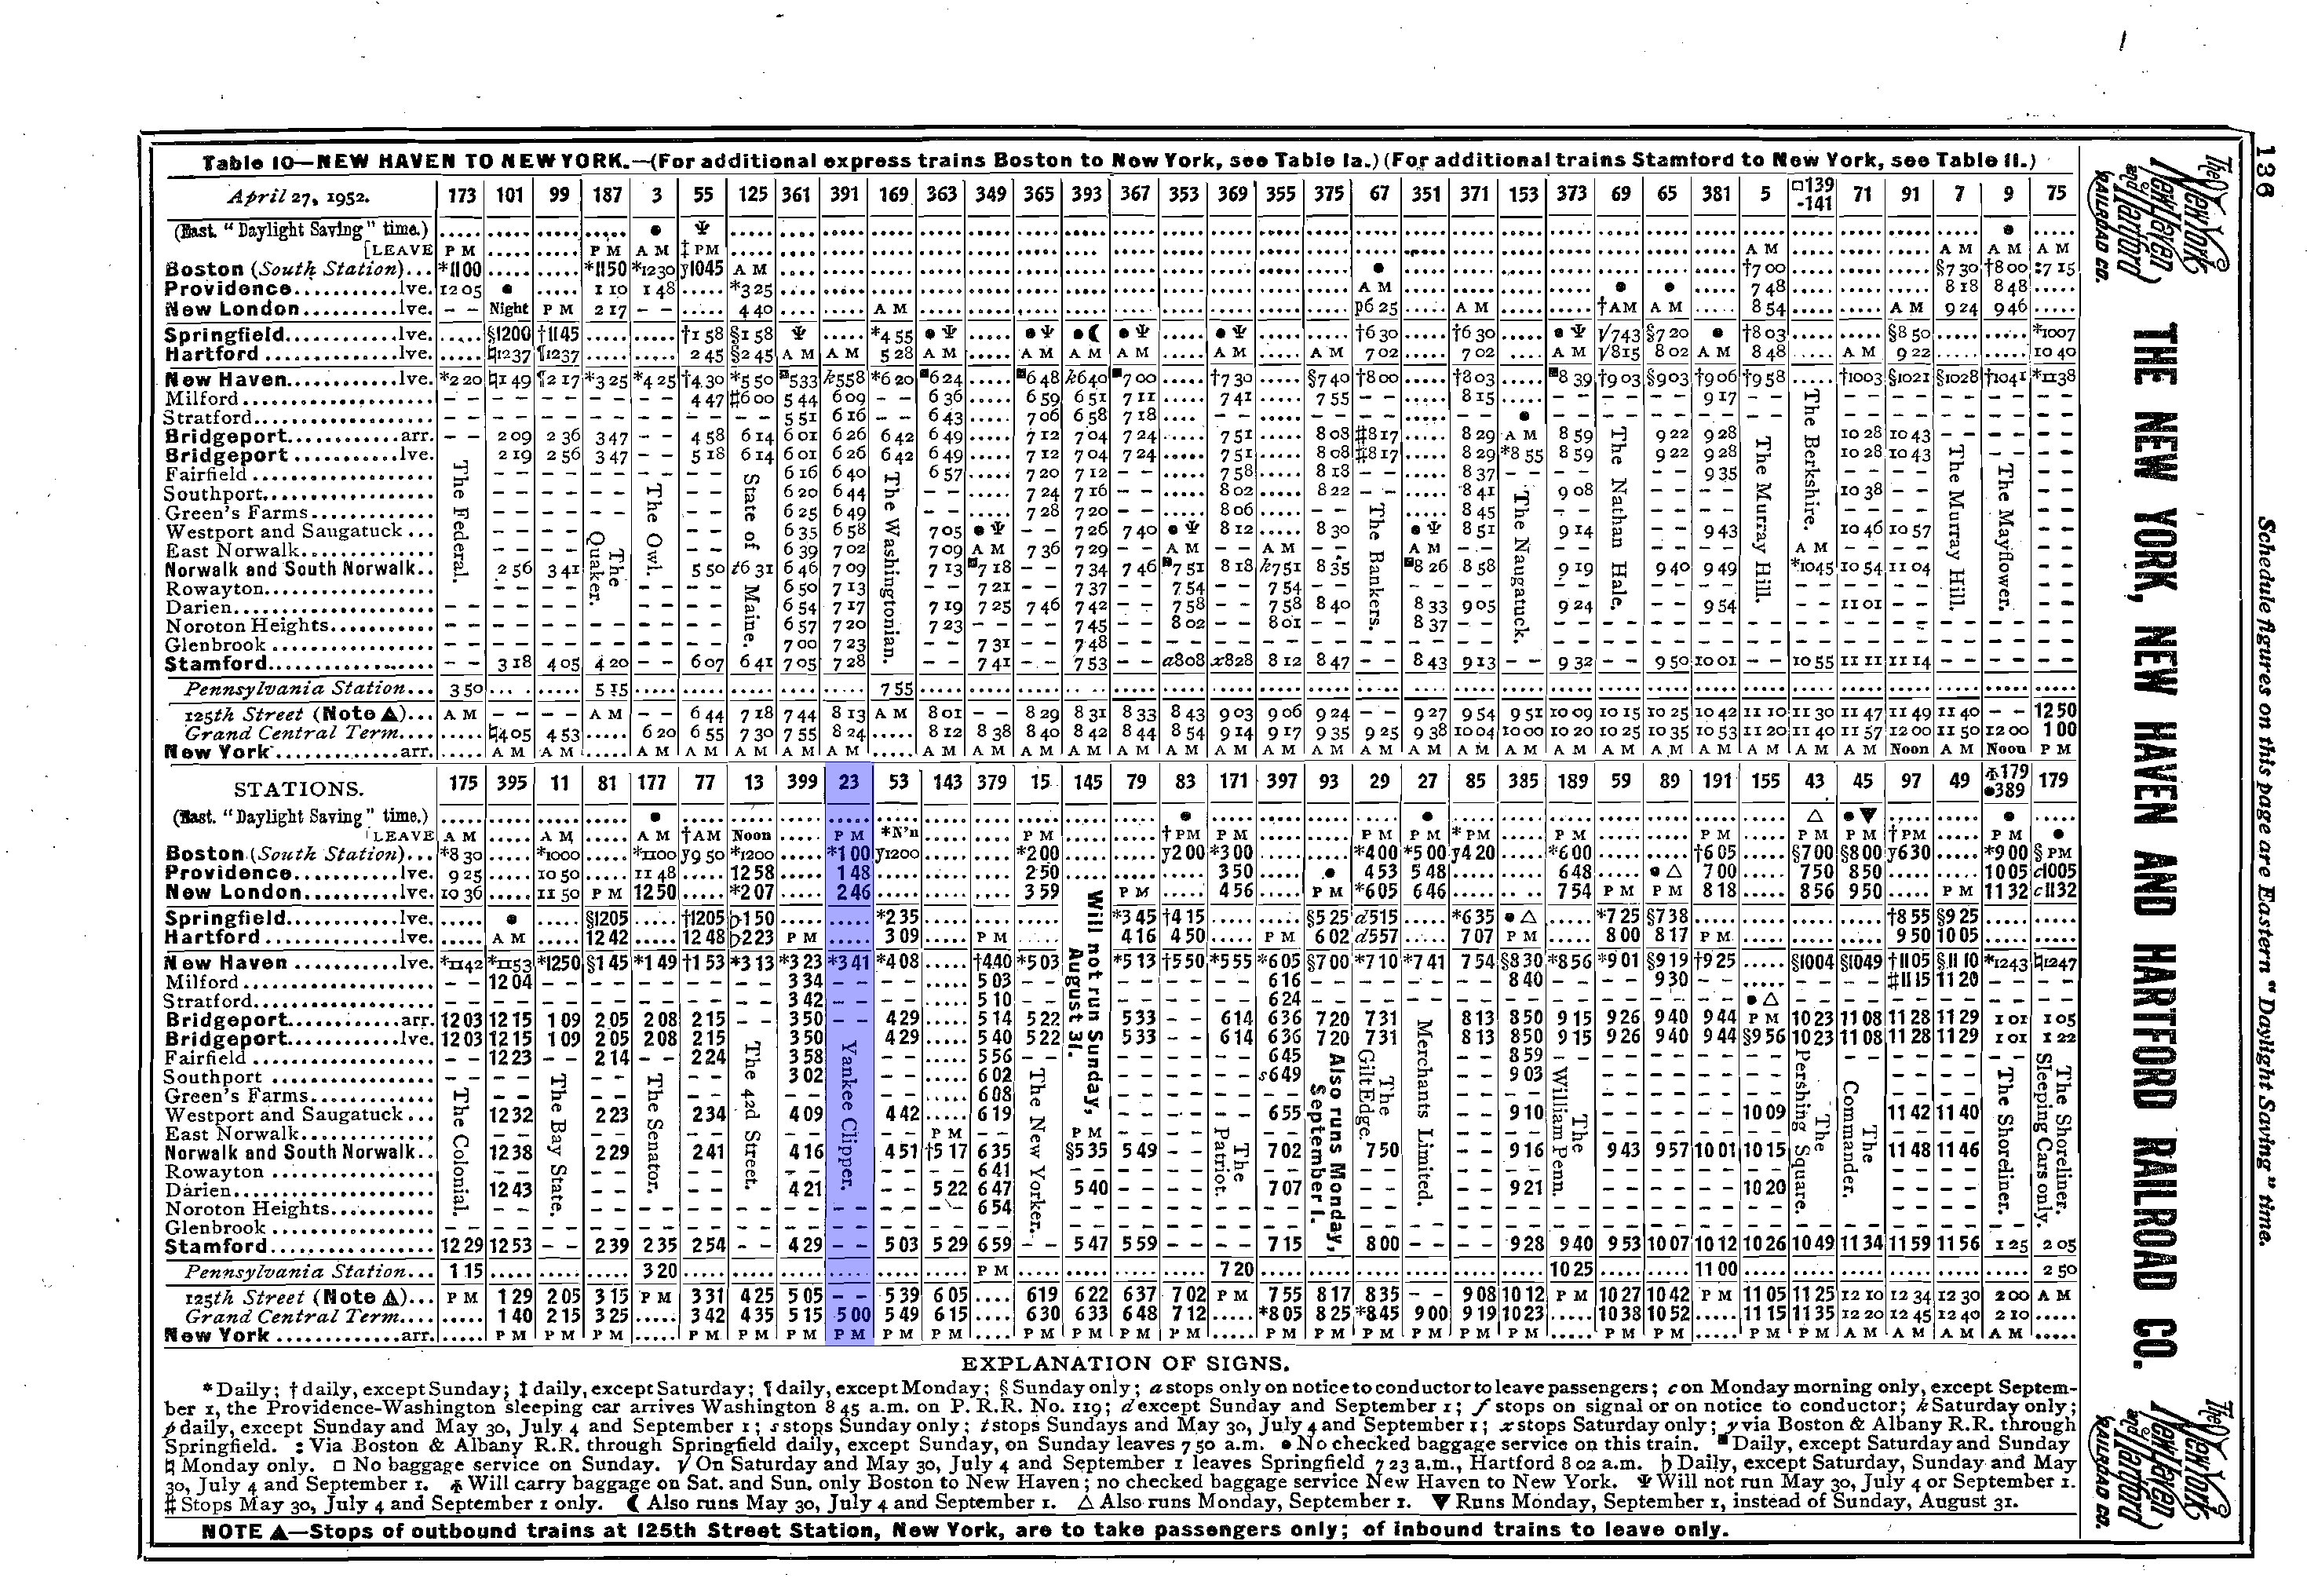 Yankee Clipper (Train): Timetables, Route, History